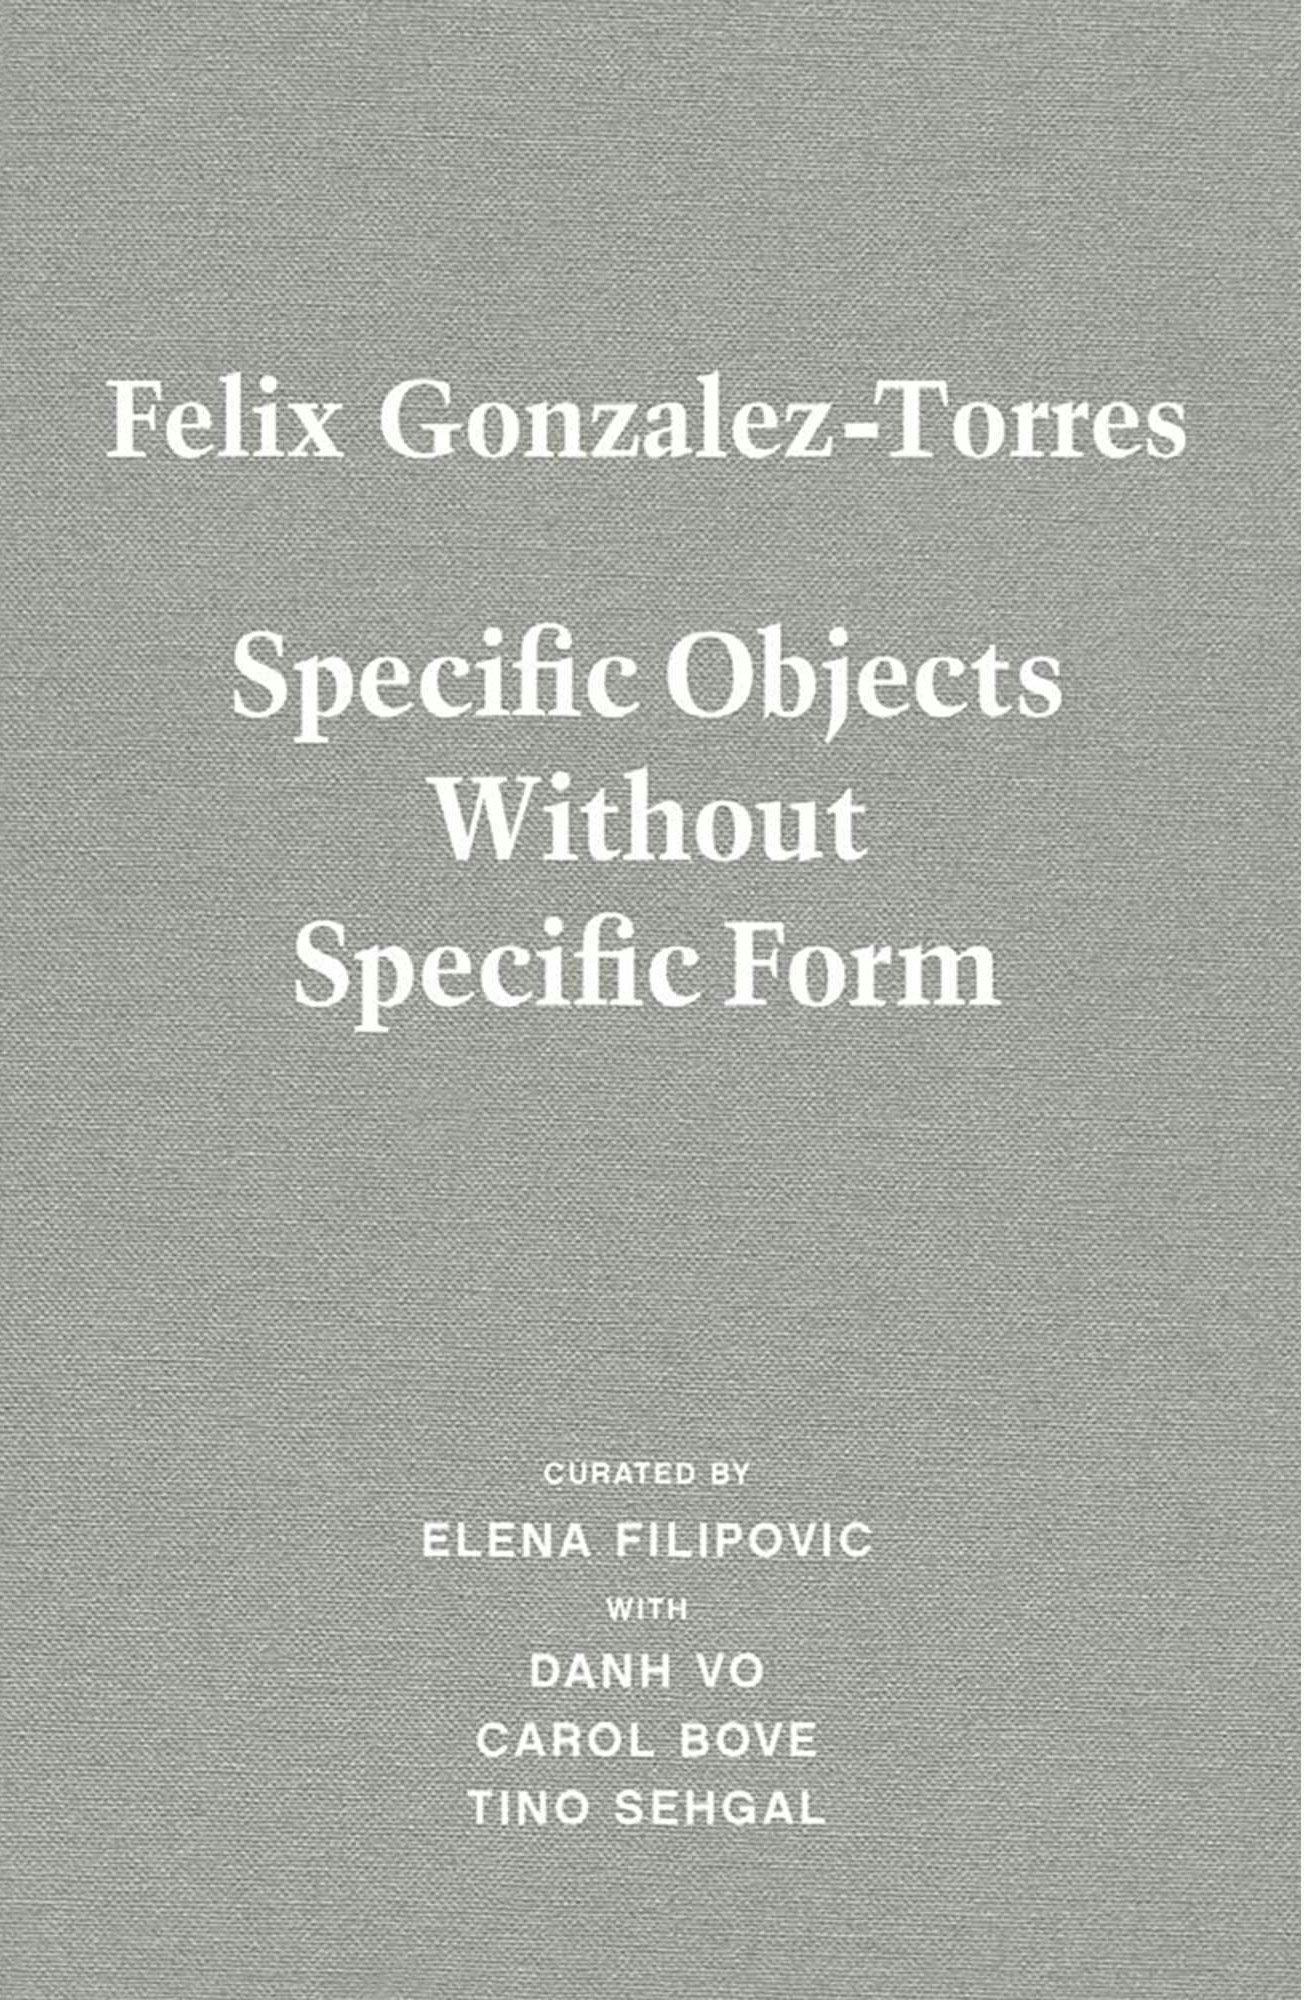 The cover of a book, titled Felix Gonzalez-Torres: Specific Objects Without Specific Form.